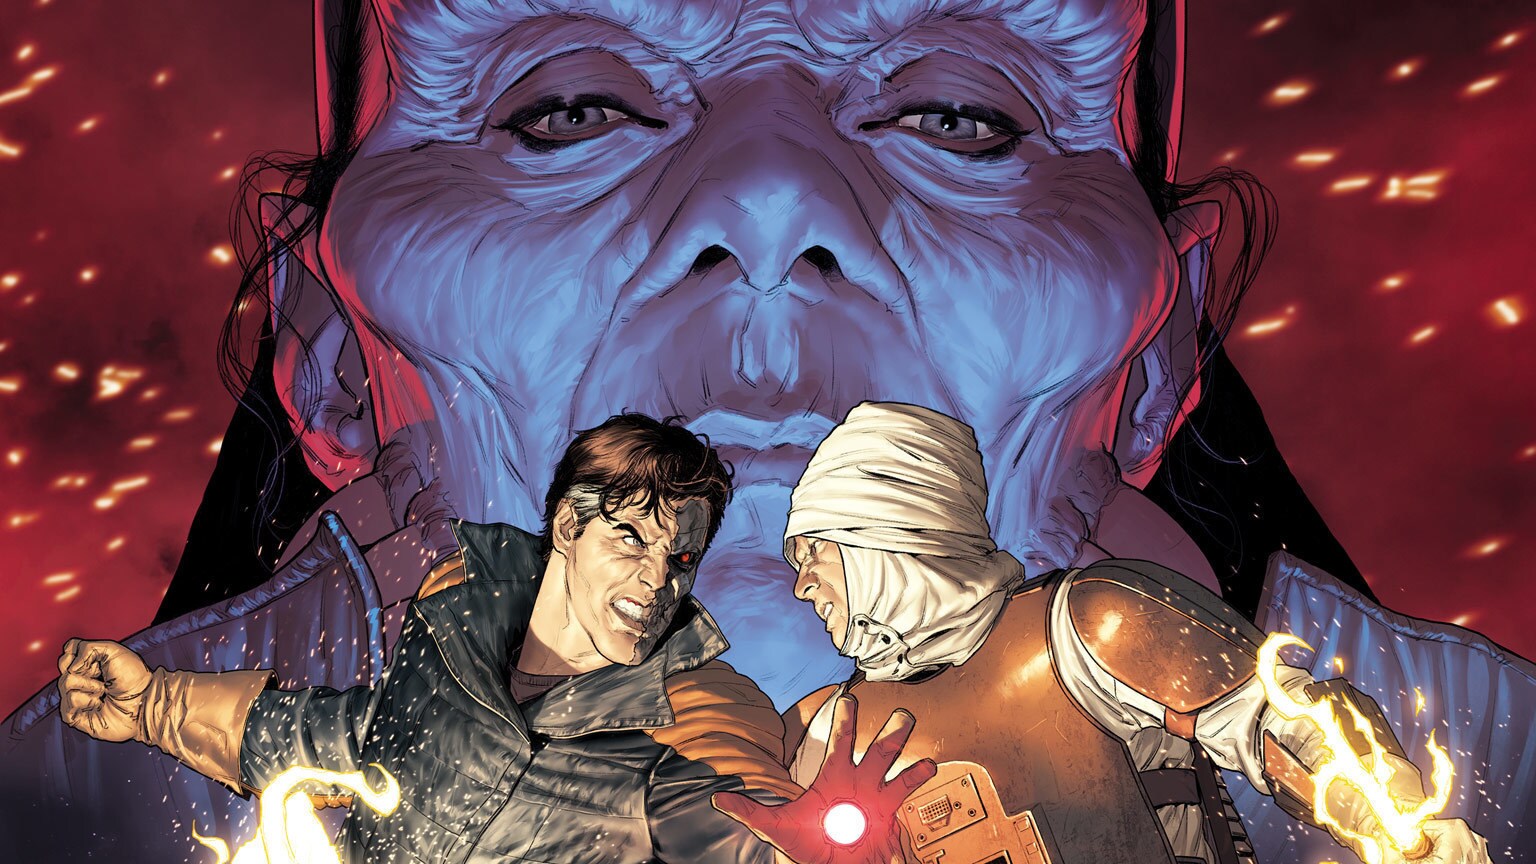 Beilert Valance has a Heart in Marvel’s Star Wars: Bounty Hunters #10 - Exclusive Preview